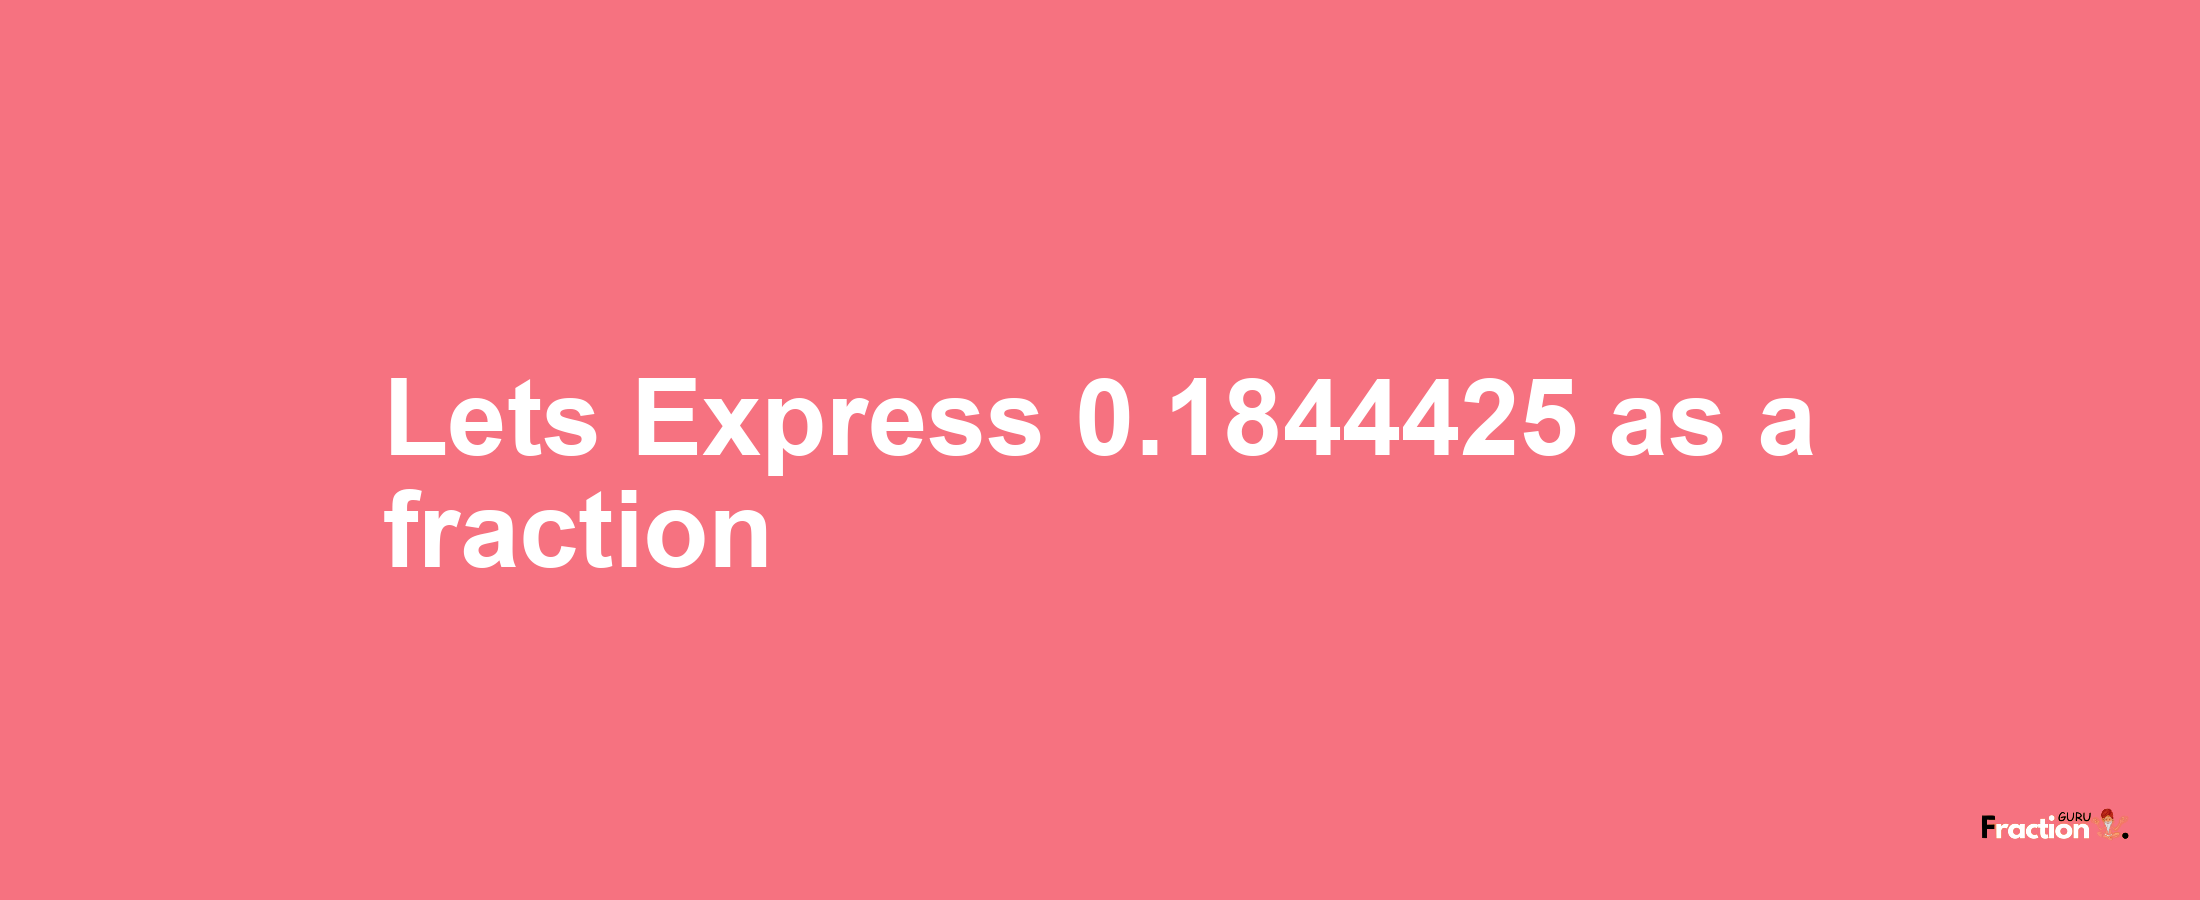 Lets Express 0.1844425 as afraction